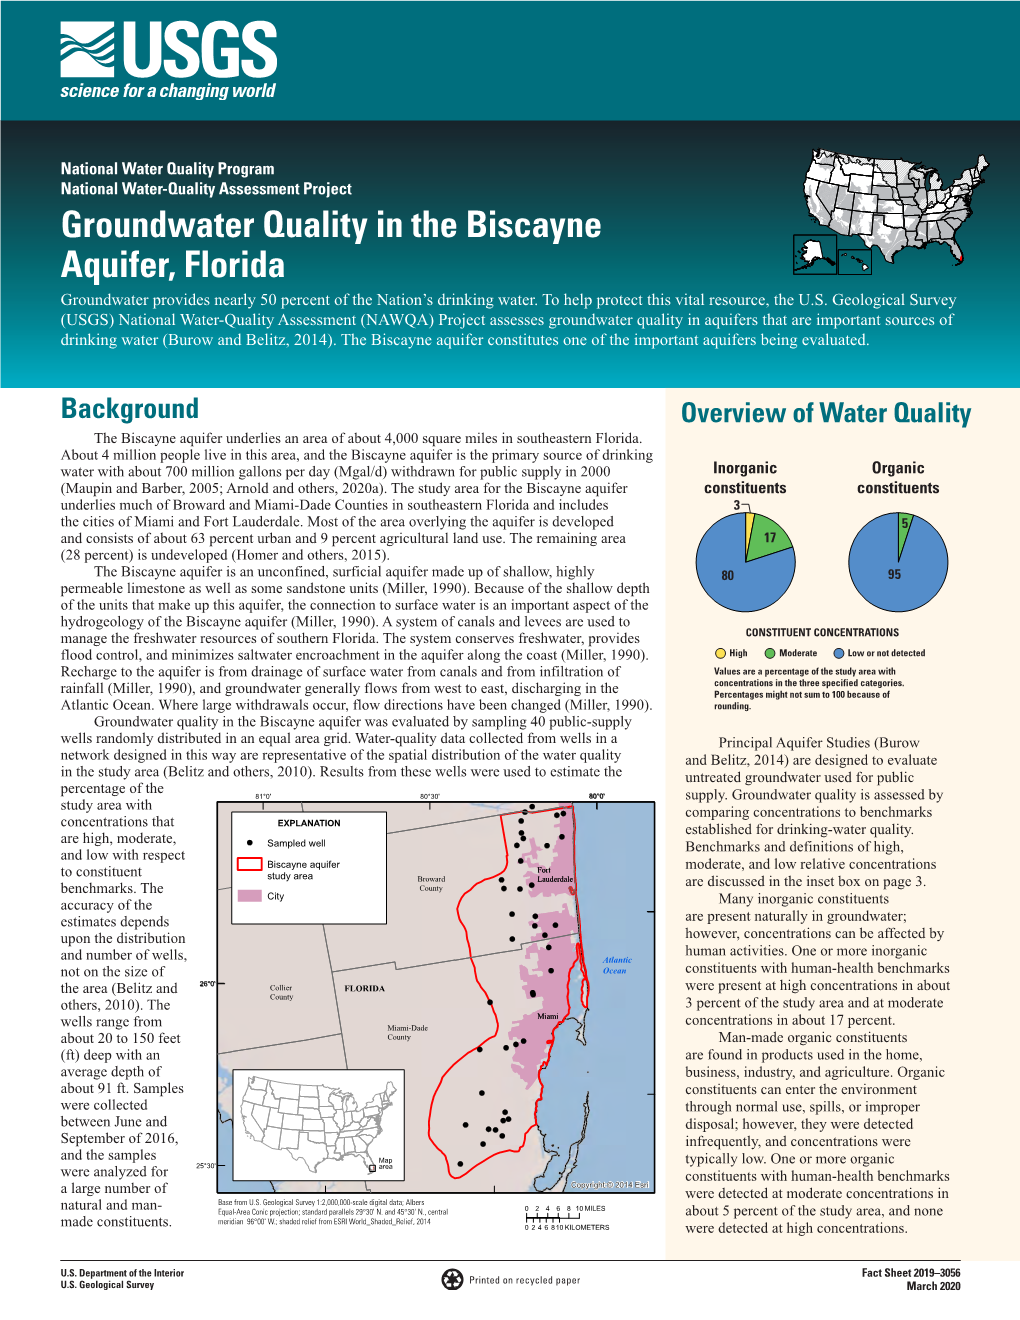 Biscayne Aquifer, Florida Groundwater Provides Nearly 50 Percent of the Nation’S Drinking Water